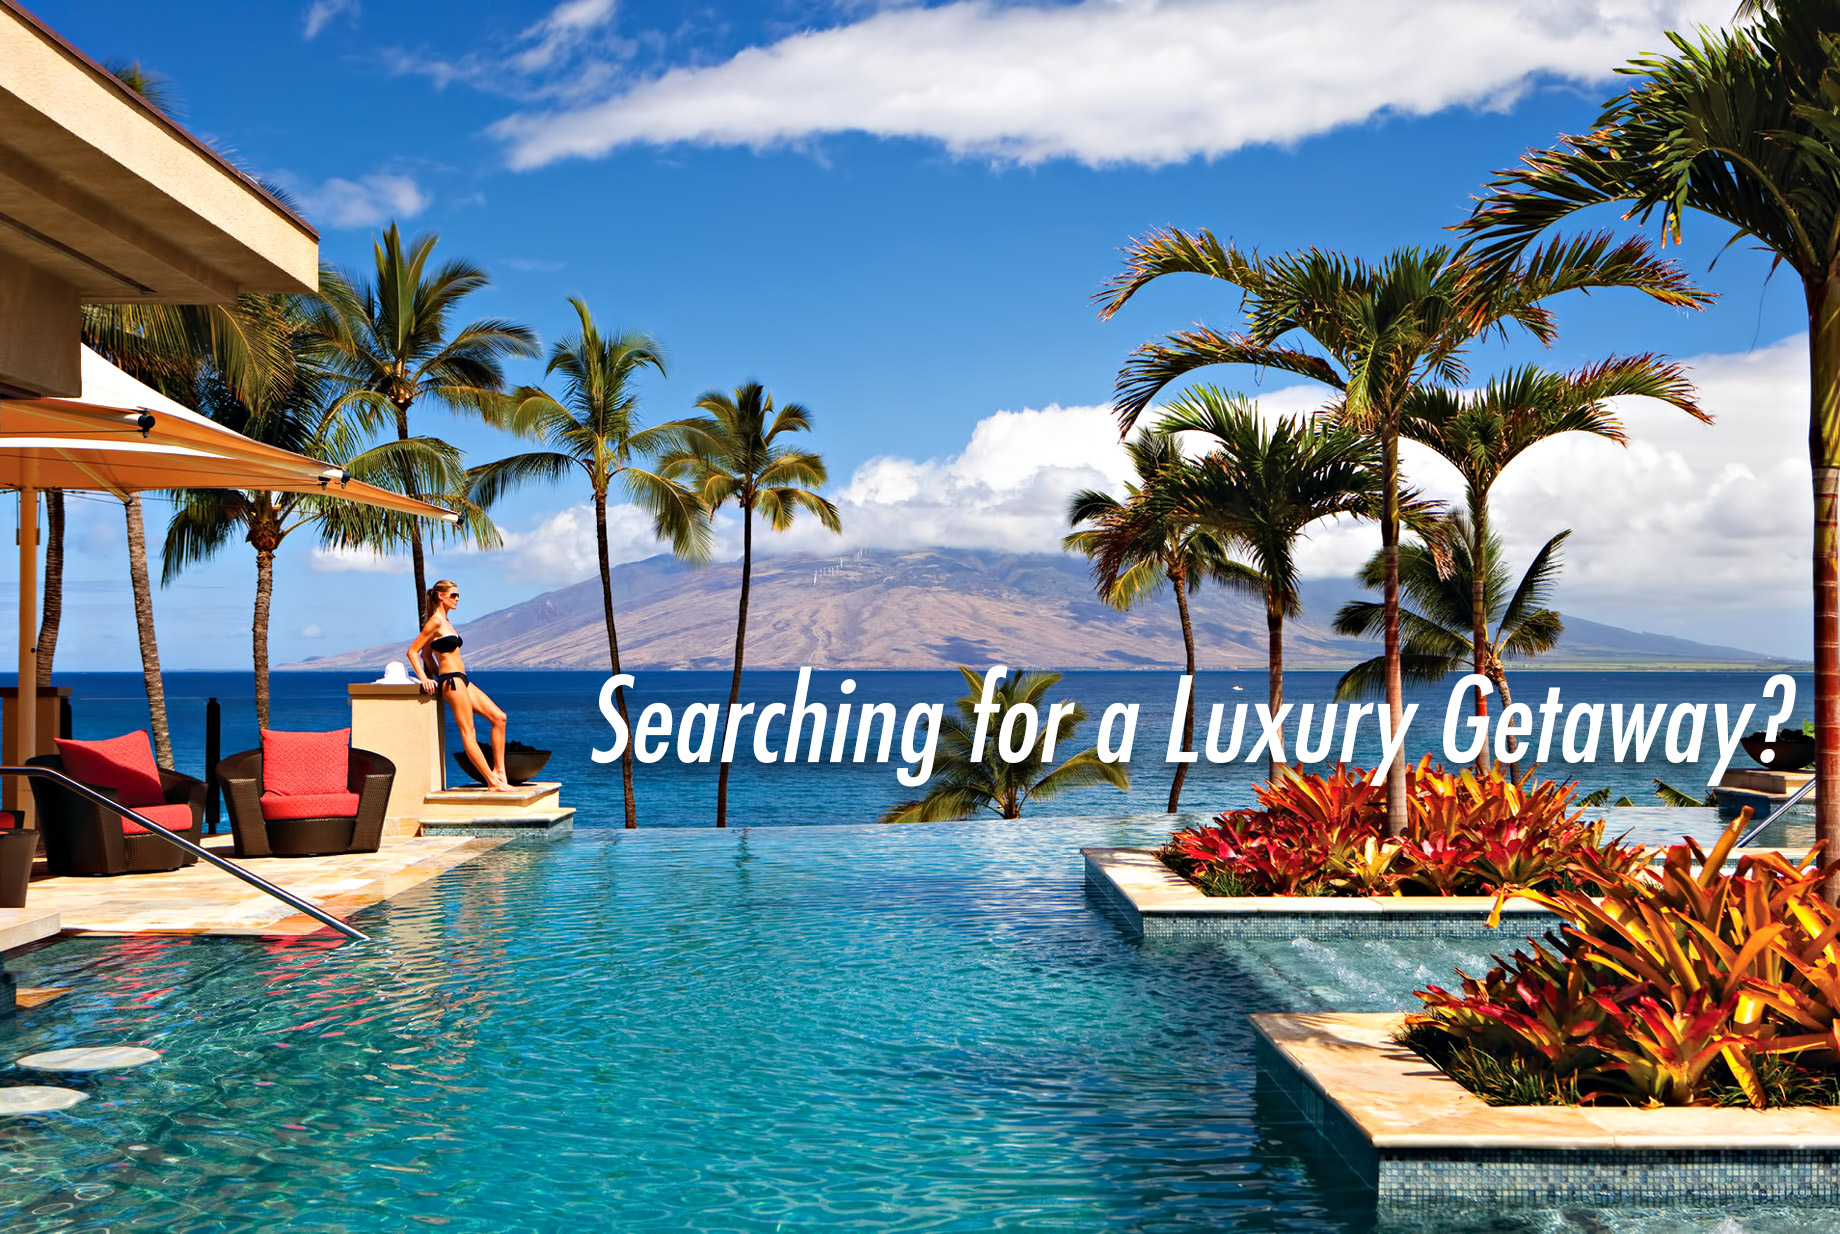 Searching for a Luxury Getaway – Here Are 3 Serene Vacation Spots to Help You Unwind